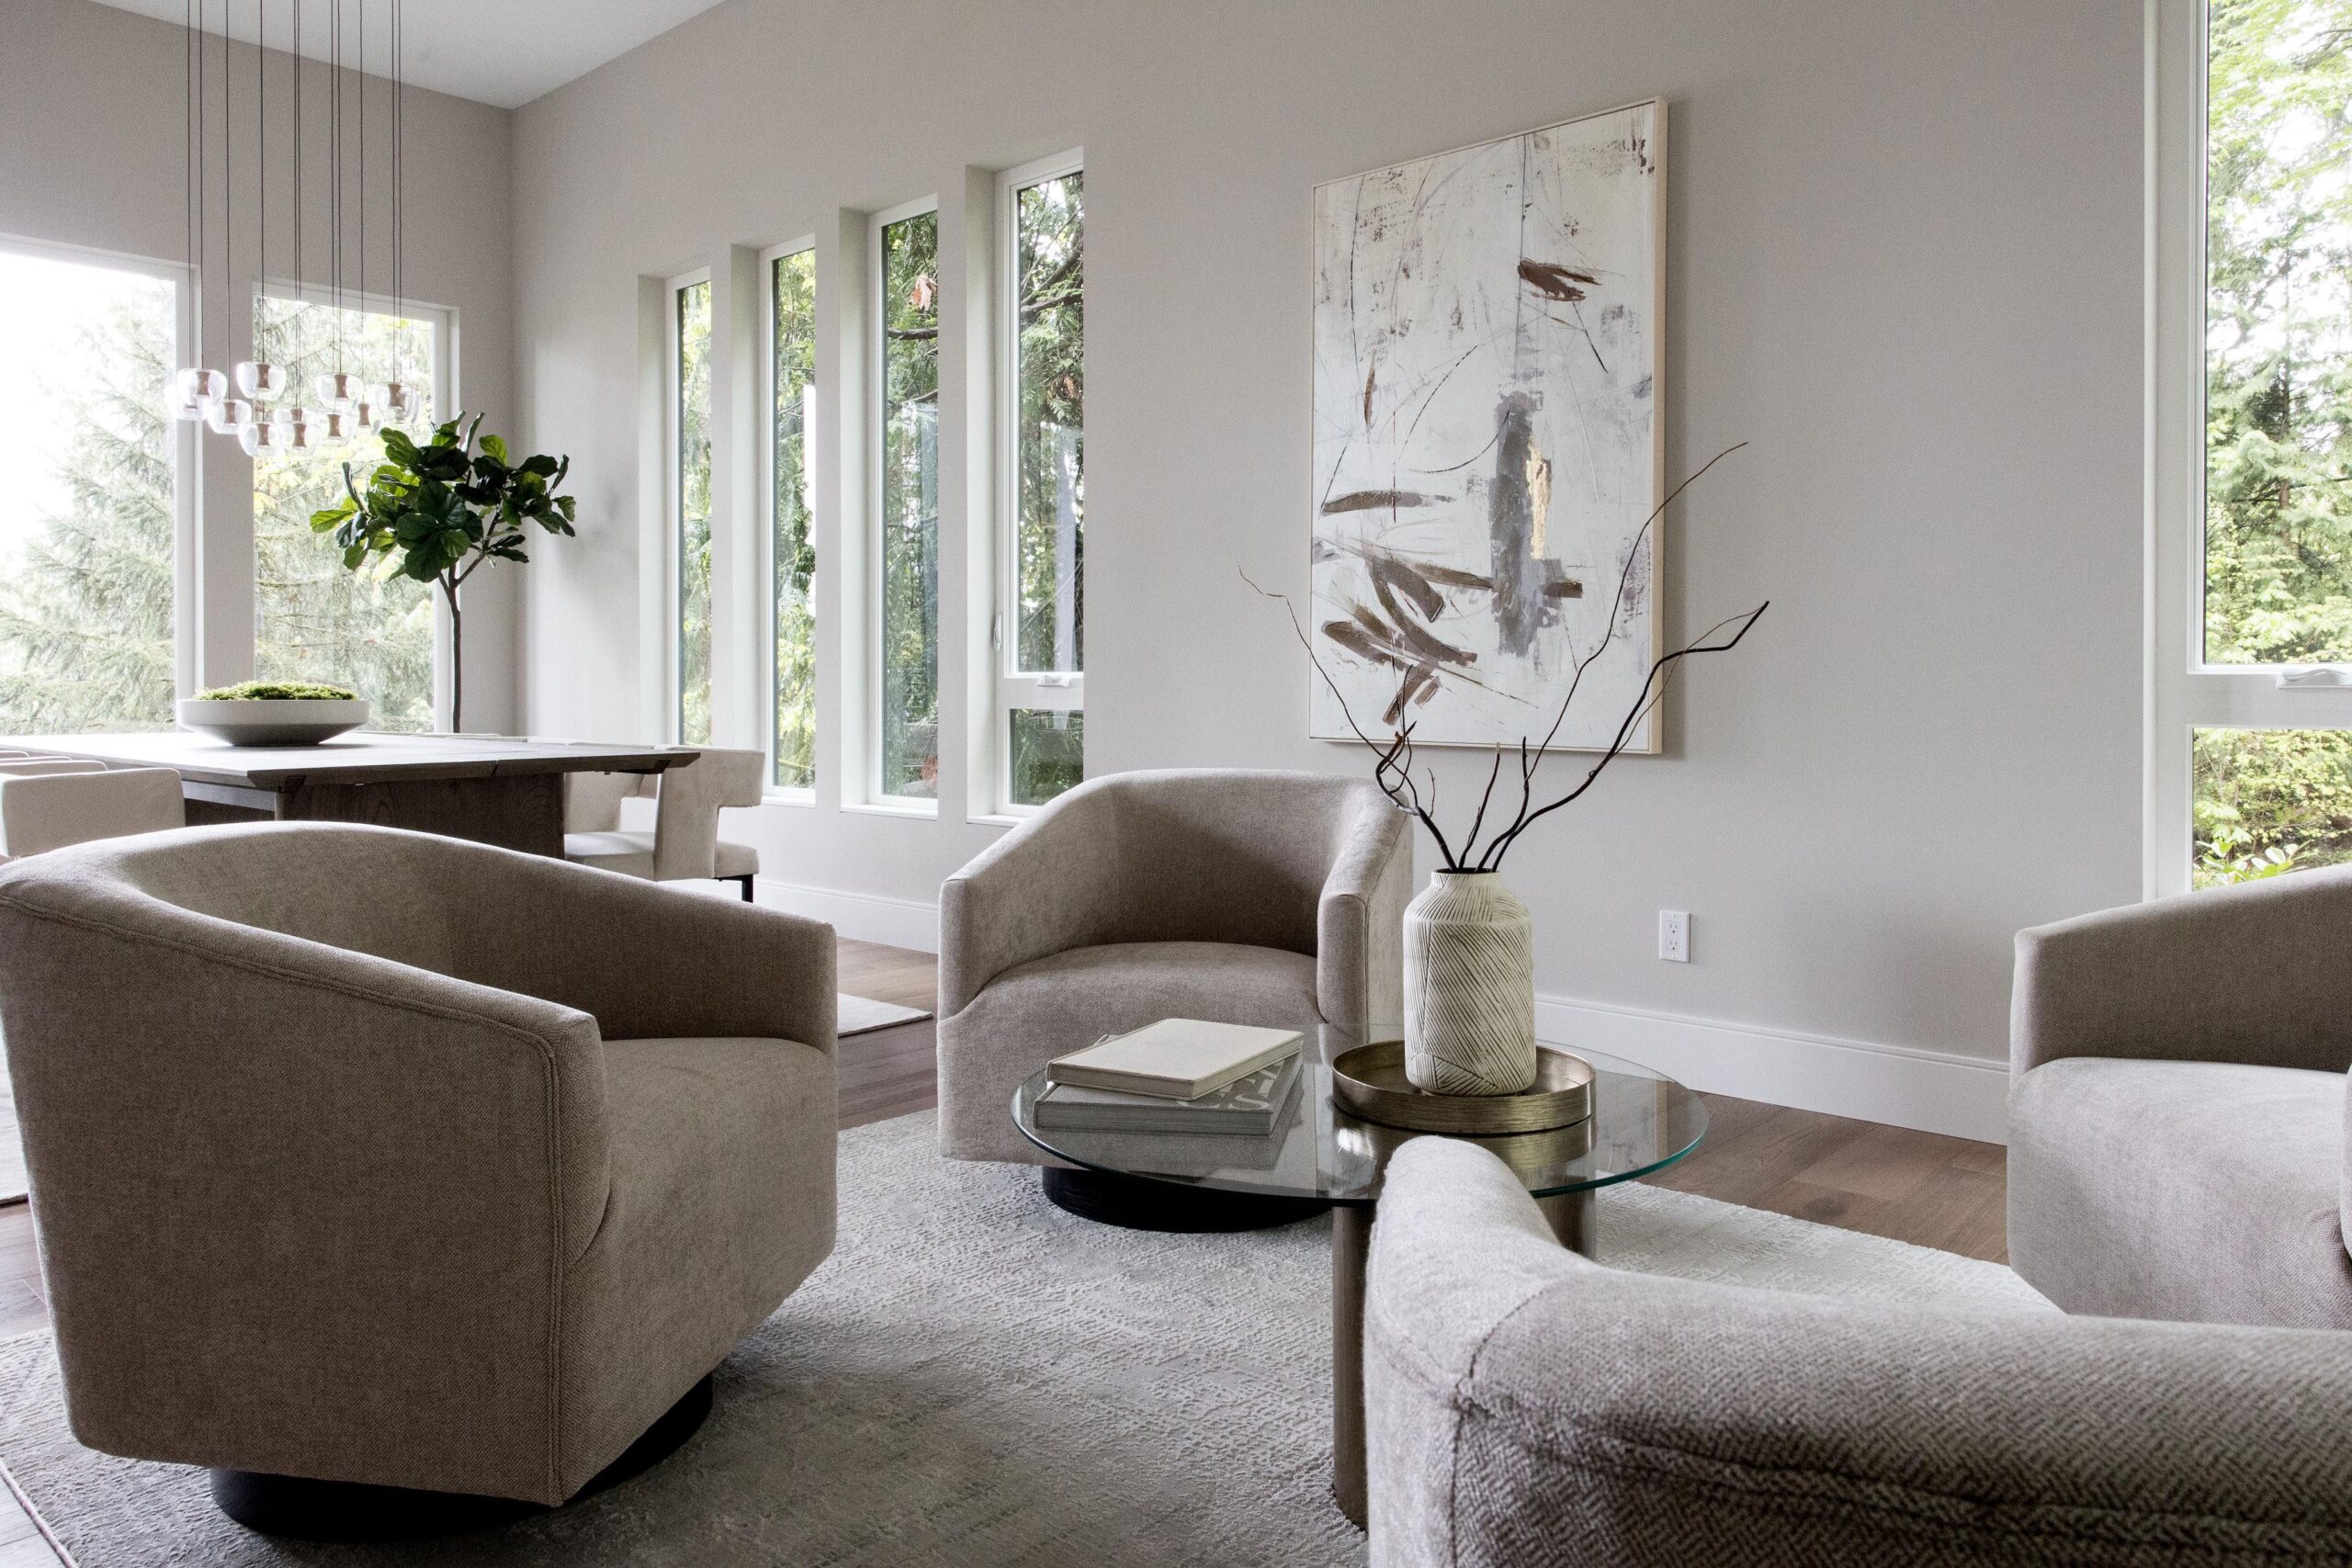 Urban Domain is a Boutique Home Staging and Interior Design Firm providing exceptional design services to Seattle’s Eastside, Seattle, Bellevue, Sammamish, Medina, Kirkland, Tacoma